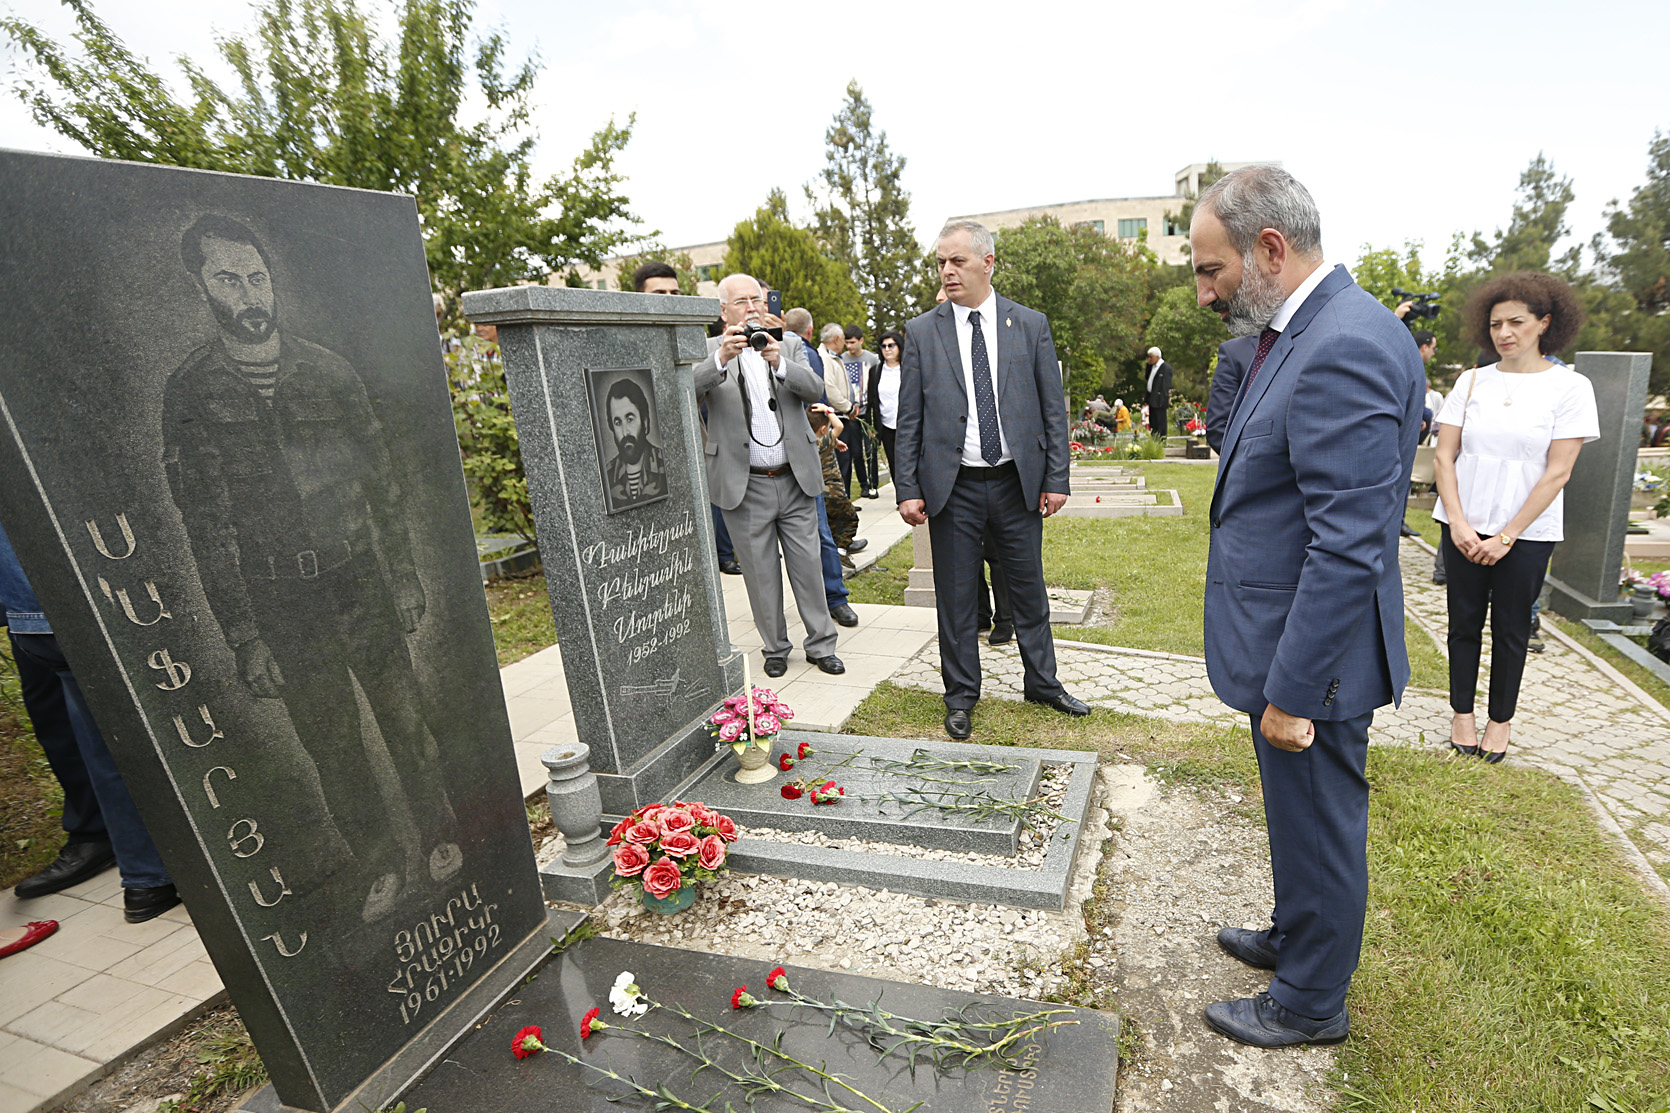 Armenian Prime Minister Nikol Pashinyan visits the grave of an Armenian soldier killed in the Nagorno-Karabakh conflict with Azerbaijan. Azerbaijan reacted variously to Pashinyan’s big win in parliamentary elections December 9. (photo: primeminister.am)